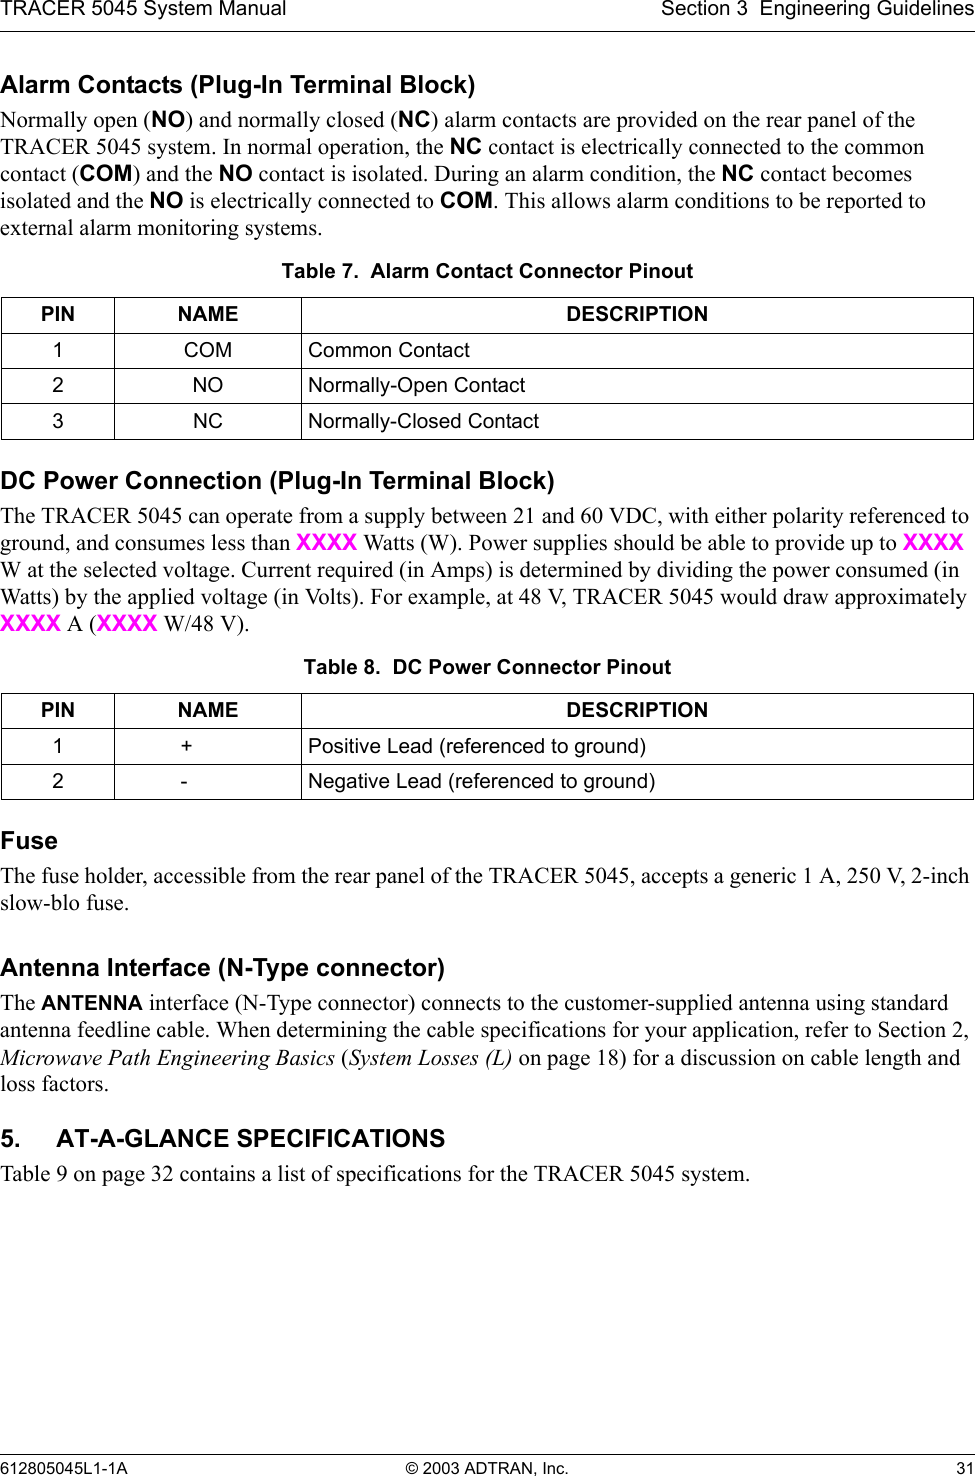 TRACER 5045 System Manual Section 3  Engineering Guidelines612805045L1-1A © 2003 ADTRAN, Inc. 31Alarm Contacts (Plug-In Terminal Block)Normally open (NO) and normally closed (NC) alarm contacts are provided on the rear panel of the TRACER 5045 system. In normal operation, the NC contact is electrically connected to the common contact (COM) and the NO contact is isolated. During an alarm condition, the NC contact becomes isolated and the NO is electrically connected to COM. This allows alarm conditions to be reported to external alarm monitoring systems.DC Power Connection (Plug-In Terminal Block)The TRACER 5045 can operate from a supply between 21 and 60 VDC, with either polarity referenced to ground, and consumes less than XXXX Watts (W). Power supplies should be able to provide up to XXXX W at the selected voltage. Current required (in Amps) is determined by dividing the power consumed (in Watts) by the applied voltage (in Volts). For example, at 48 V, TRACER 5045 would draw approximately XXXX A (XXXX W/48 V).FuseThe fuse holder, accessible from the rear panel of the TRACER 5045, accepts a generic 1 A, 250 V, 2-inch slow-blo fuse.Antenna Interface (N-Type connector)The ANTENNA interface (N-Type connector) connects to the customer-supplied antenna using standard antenna feedline cable. When determining the cable specifications for your application, refer to Section 2, Microwave Path Engineering Basics (System Losses (L) on page 18) for a discussion on cable length and loss factors.5. AT-A-GLANCE SPECIFICATIONSTable 9 on page 32 contains a list of specifications for the TRACER 5045 system.Table 7.  Alarm Contact Connector PinoutPIN NAME DESCRIPTION1 COM Common Contact2NO Normally-Open Contact3NC Normally-Closed ContactTable 8.  DC Power Connector PinoutPIN NAME DESCRIPTION1 + Positive Lead (referenced to ground)2 - Negative Lead (referenced to ground)